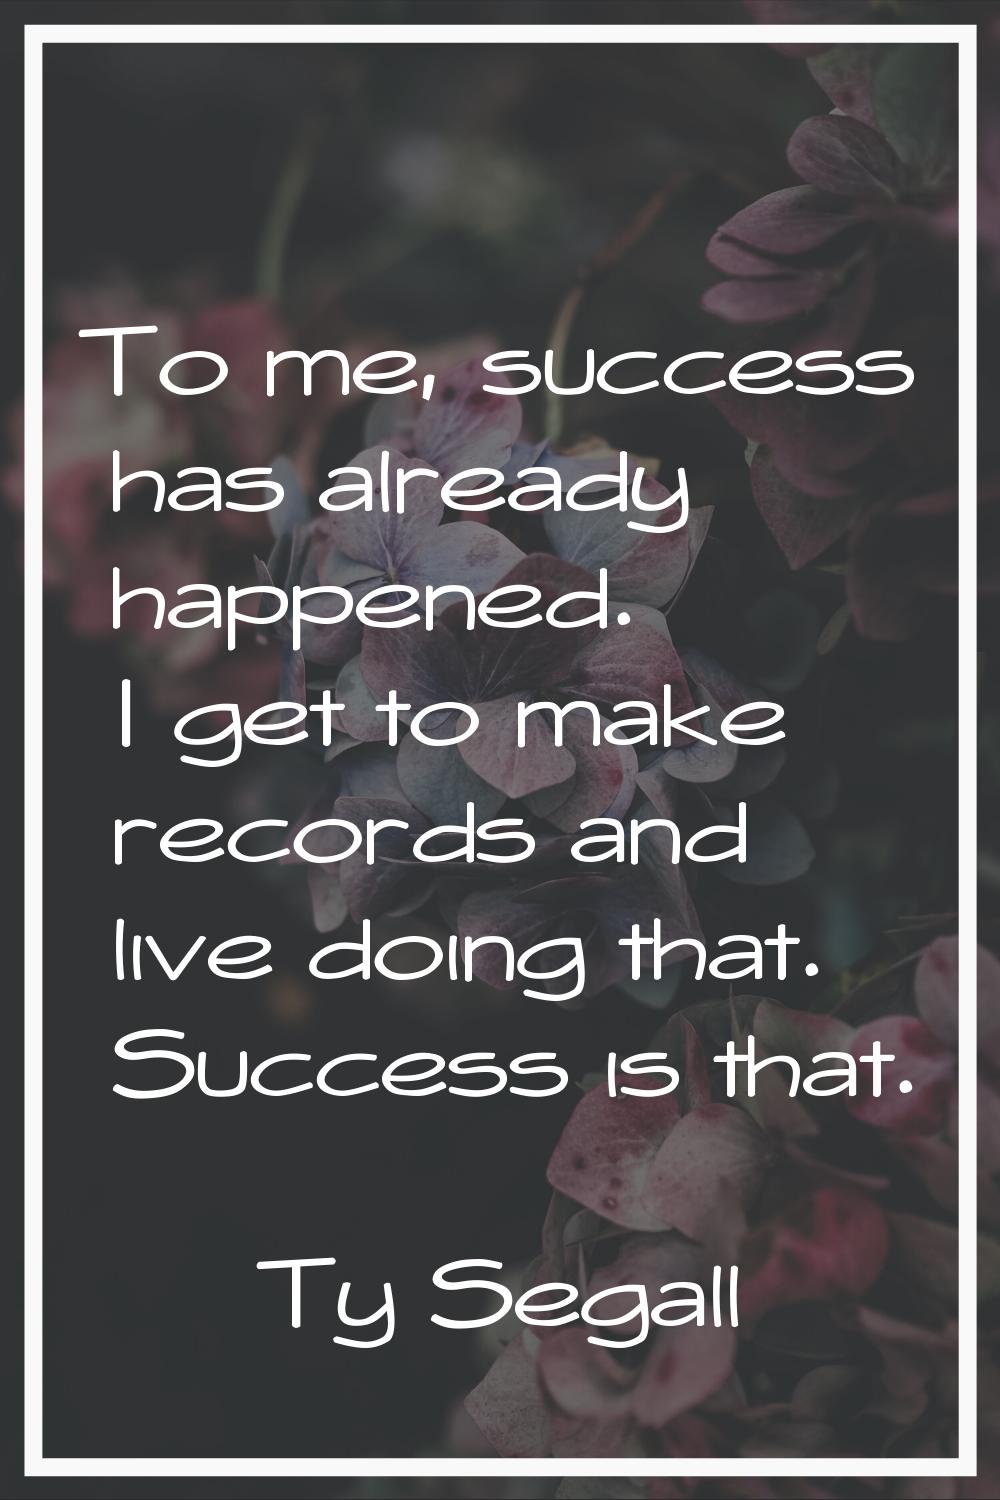 To me, success has already happened. I get to make records and live doing that. Success is that.